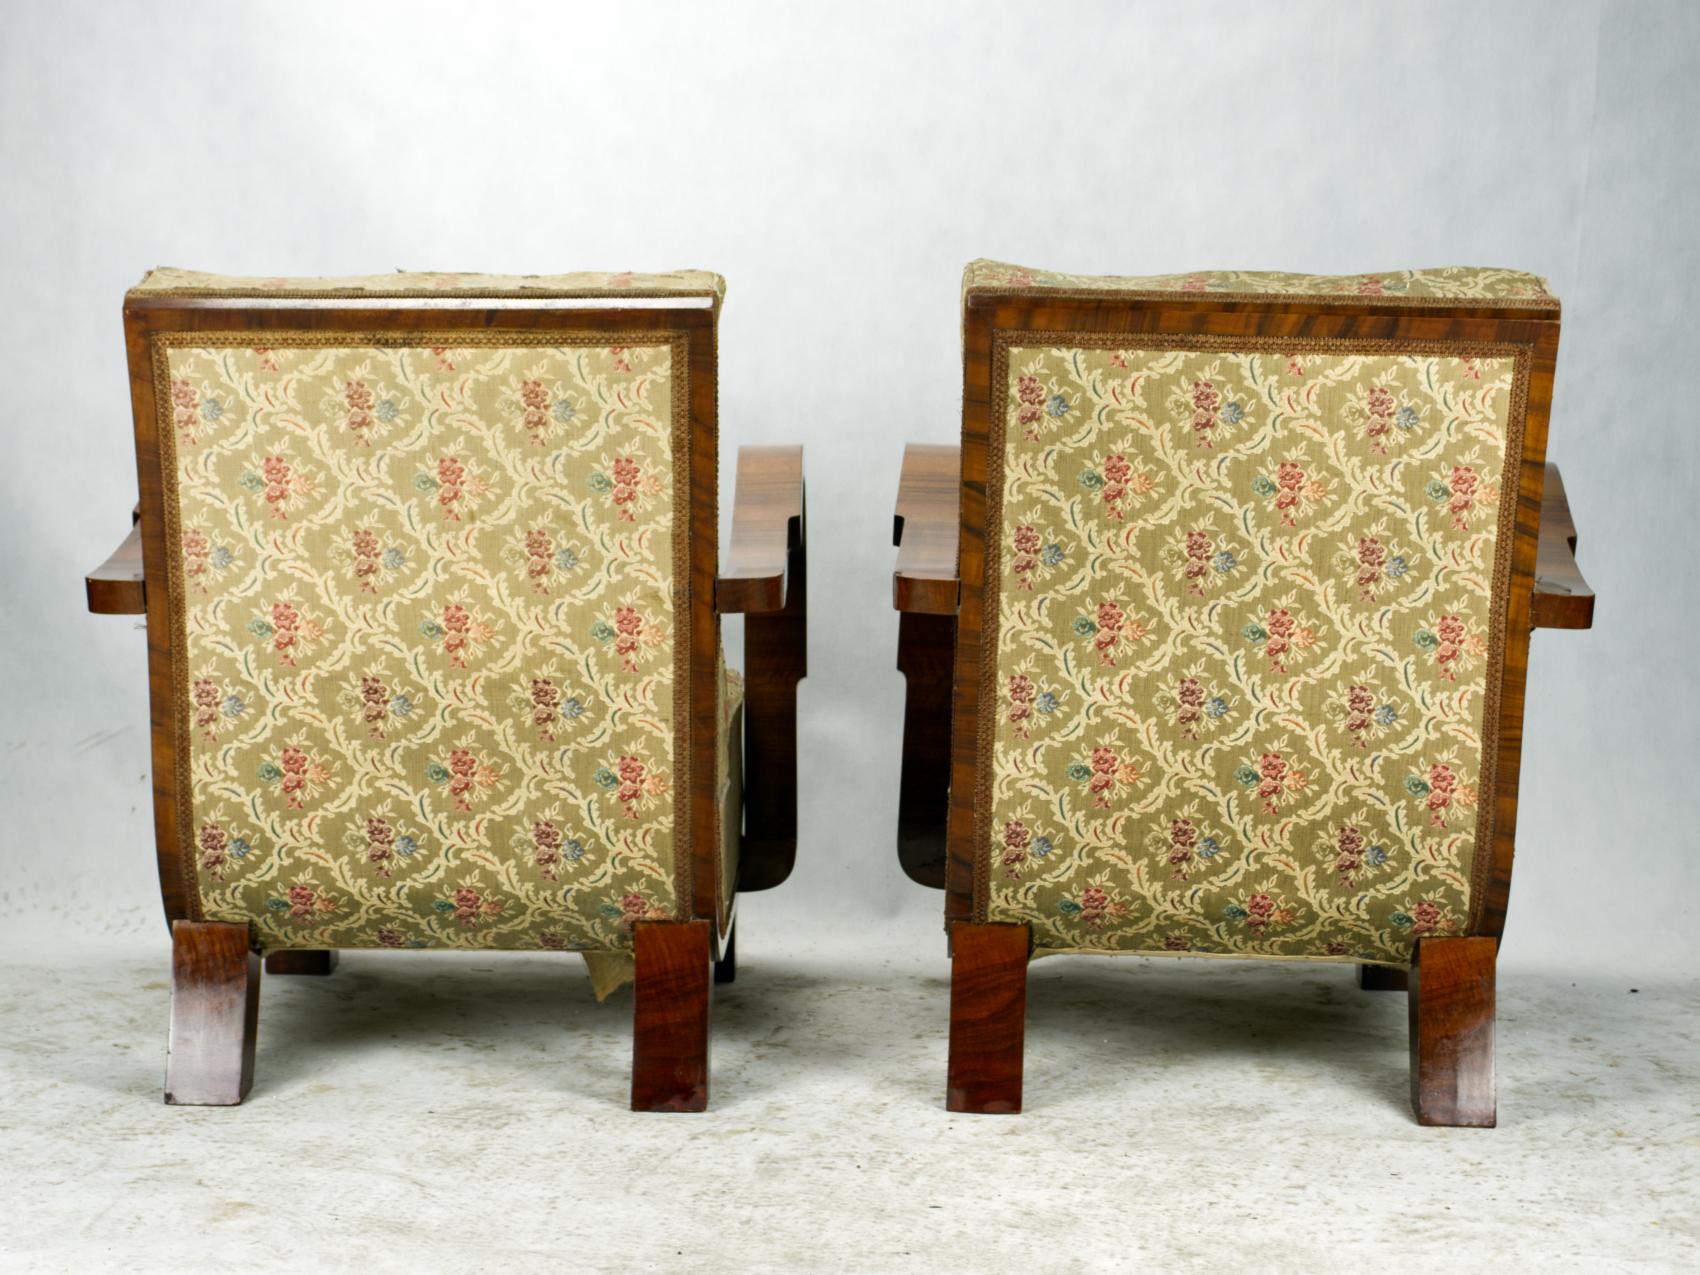 European Pair of Art Deco Armchairs / Lounge Chairs, 1930s